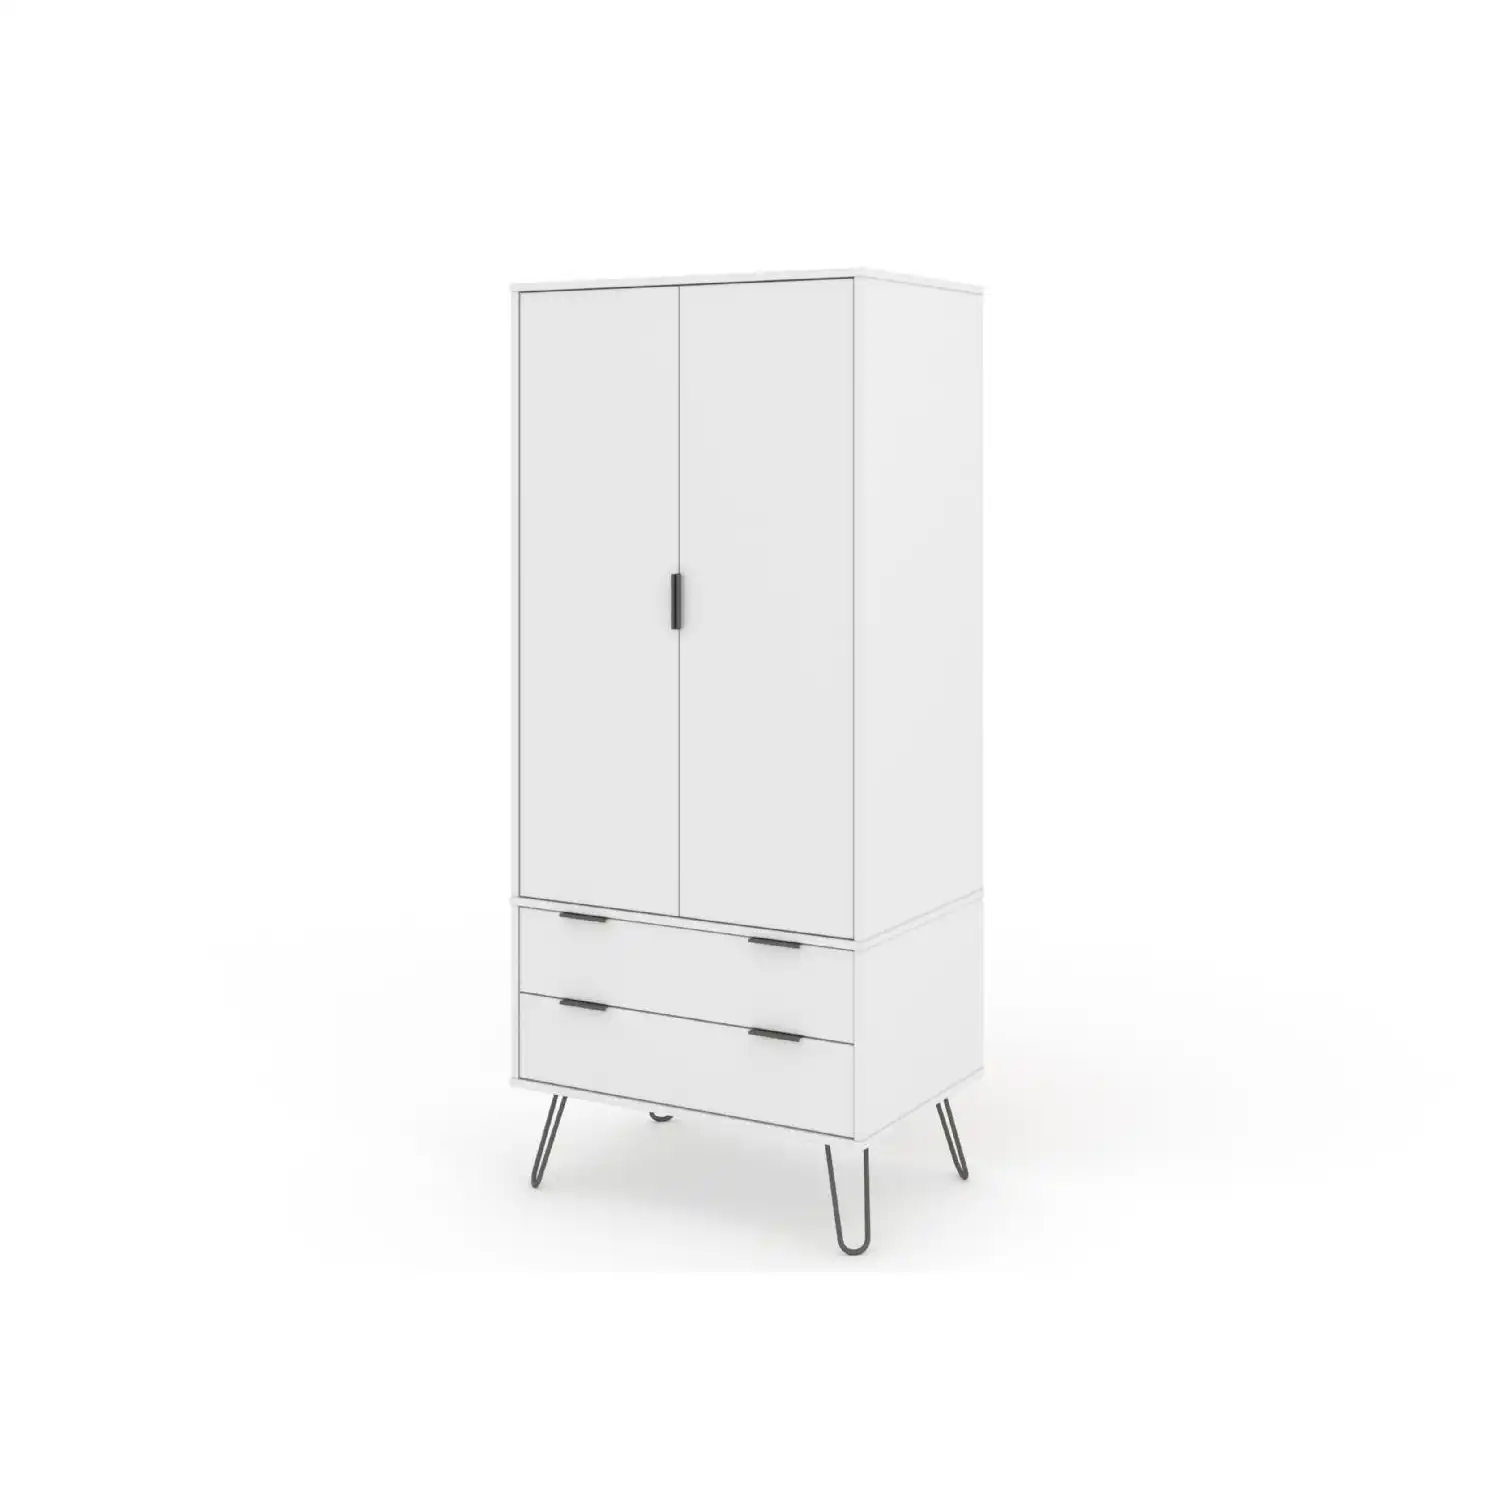 Large White Painted 2 Drawer 2 Door Double Bedroom Wardrobe Hairpin Legs 176cm Tall